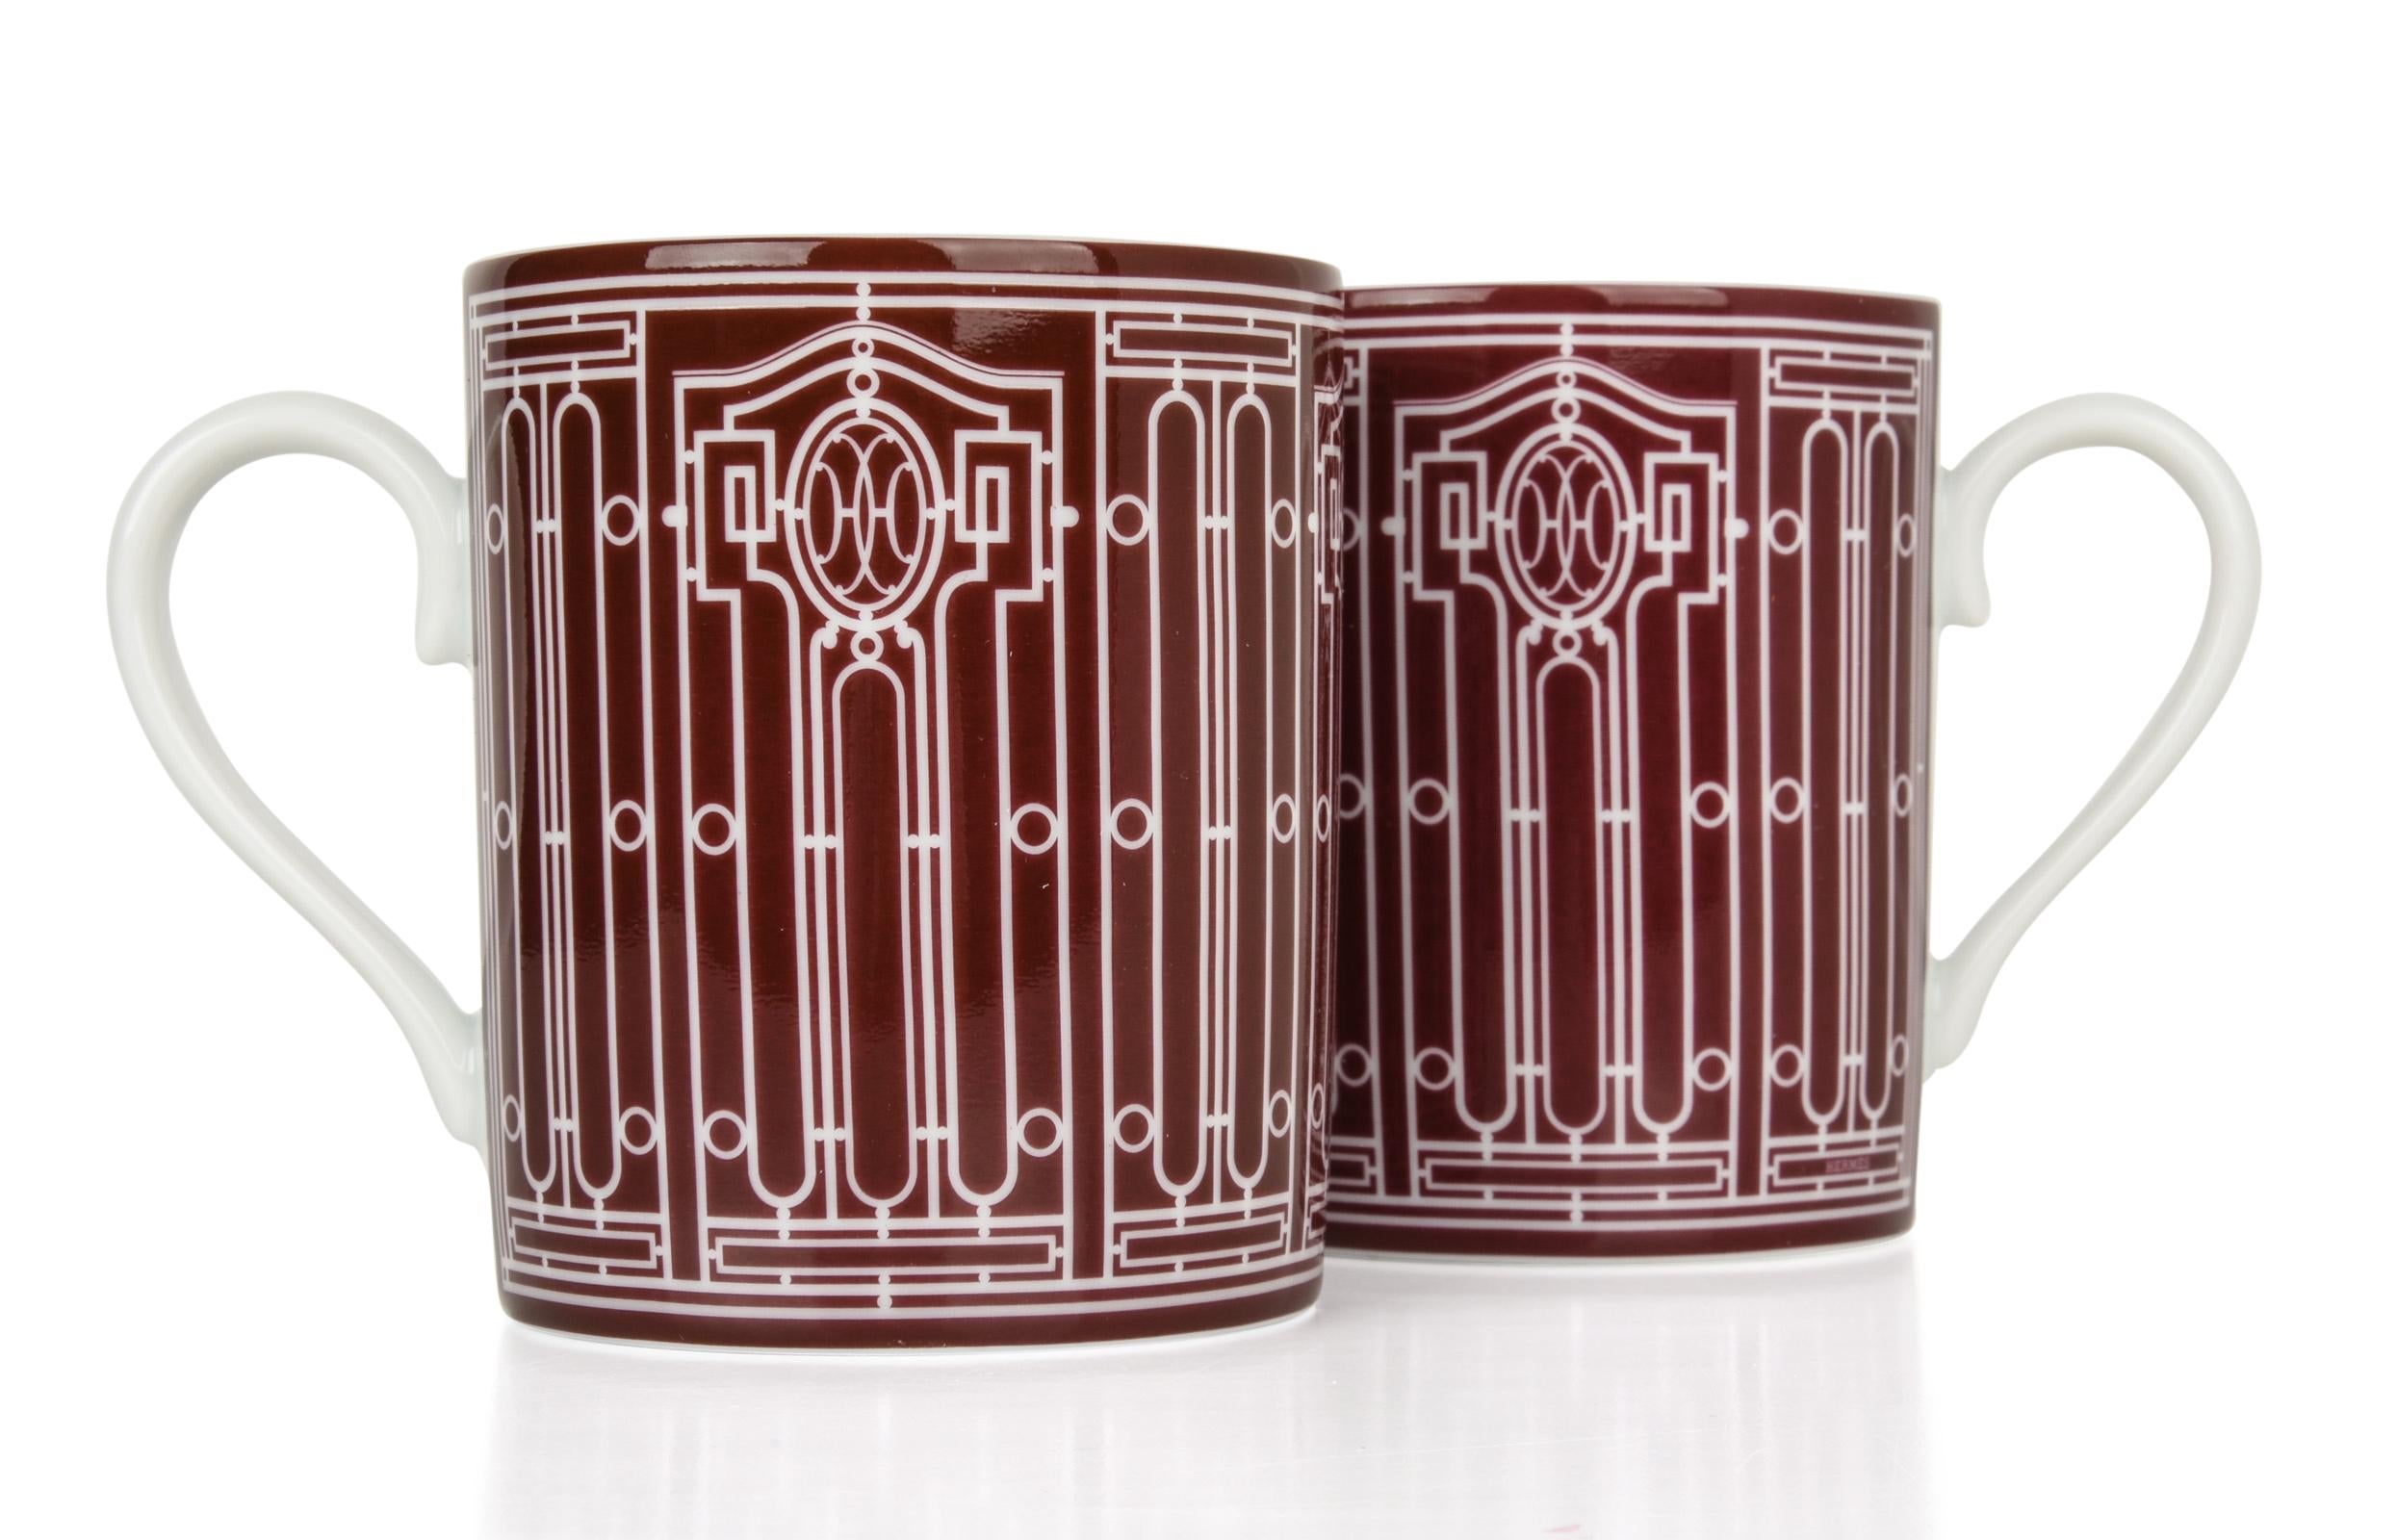 Guaranteed authentic pair of Hermes H Deco mugs featured in Rouge with white.
Features Art Deco wrought-iron friezes.
Each 10 oz mug is porcelain.
All are Deco themed in design.
Each mug comes with signature Hermes box and ribbon.
NEW or Pristine